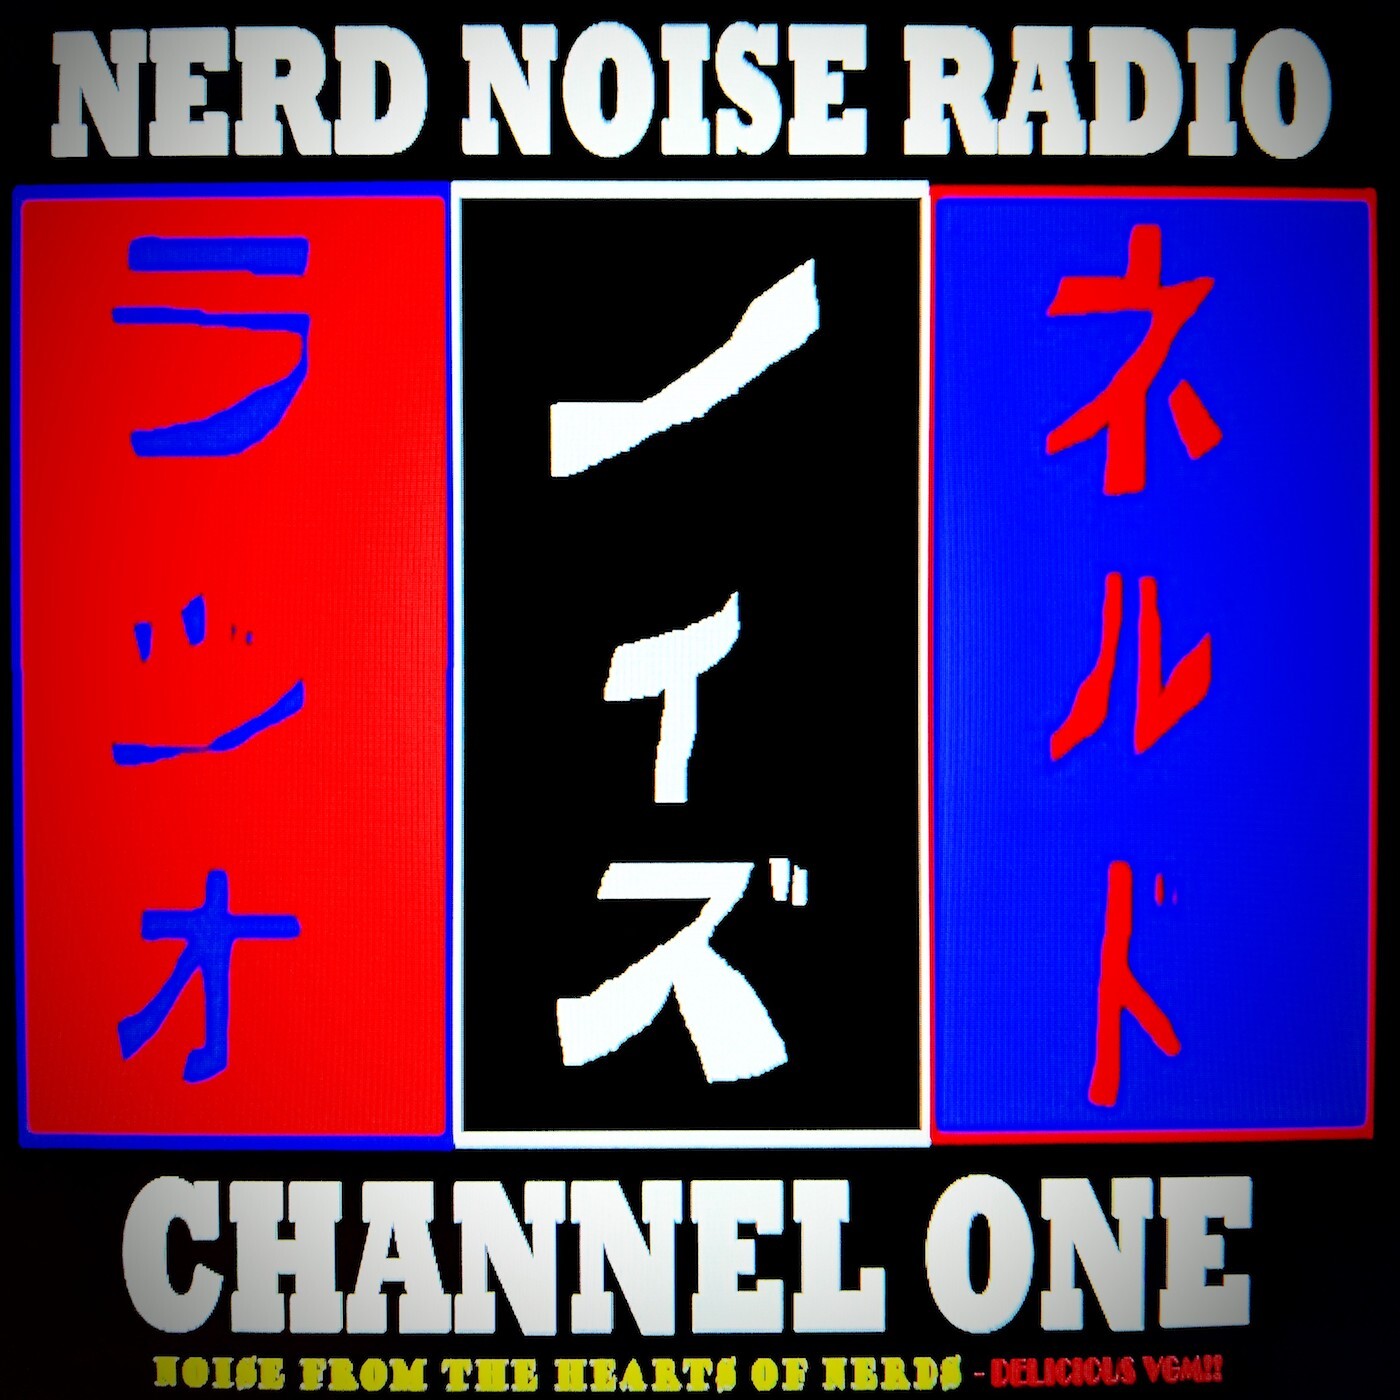 Nerd Noise Radio - Channel 1: ”Noise from the Hearts of Nerds” Podcast - C1E21: ”Secret of Mana Soundtrack”